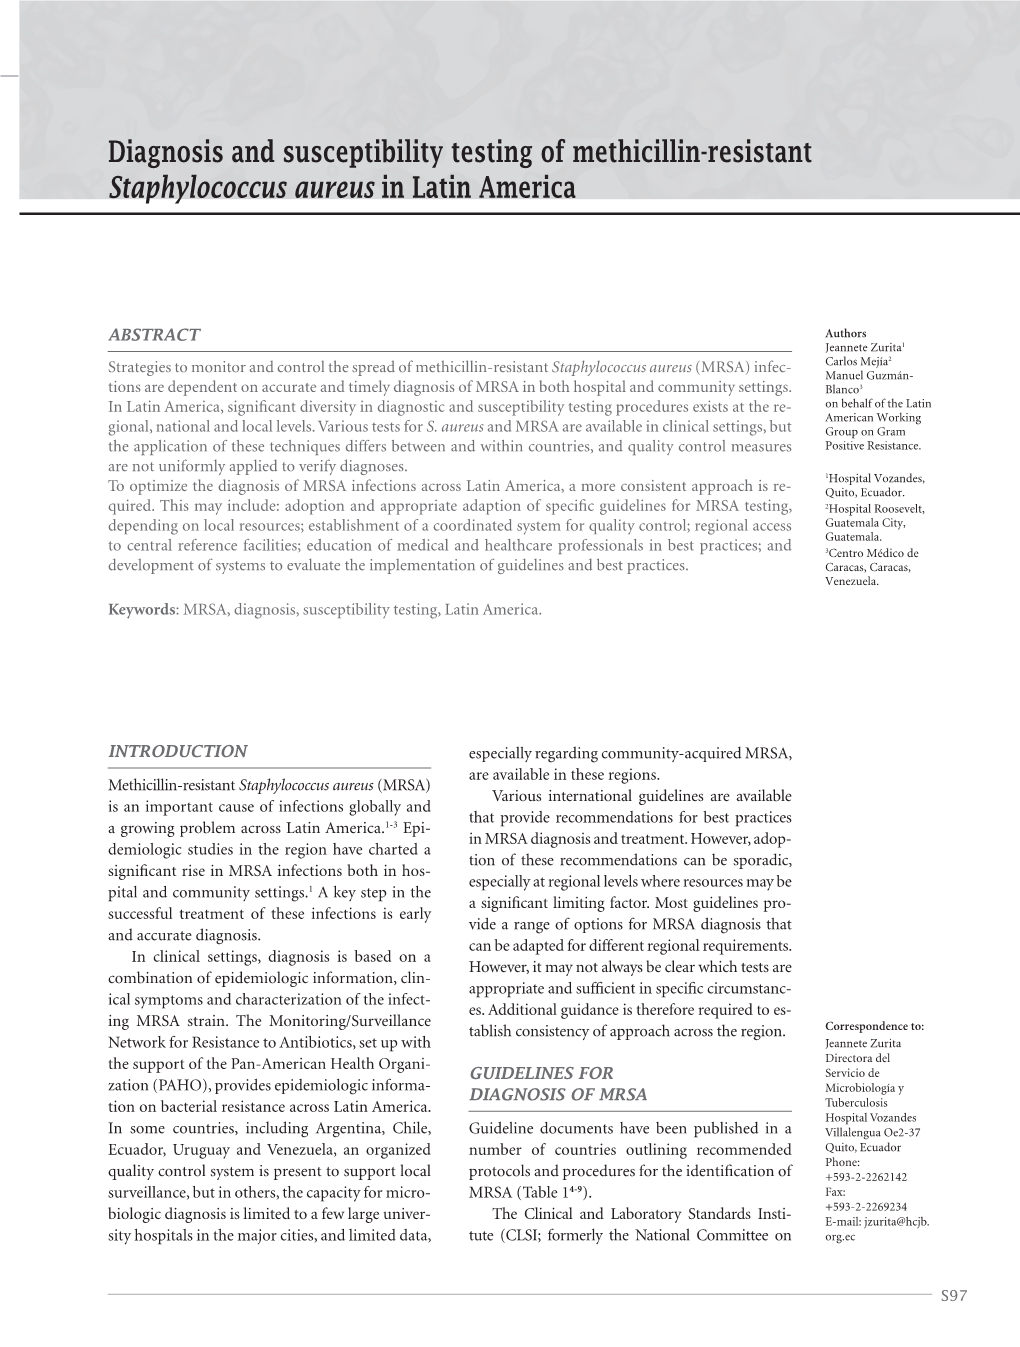 Diagnosis and Susceptibility Testing of Methicillin-Resistant Staphylococcus Aureus in Latin America